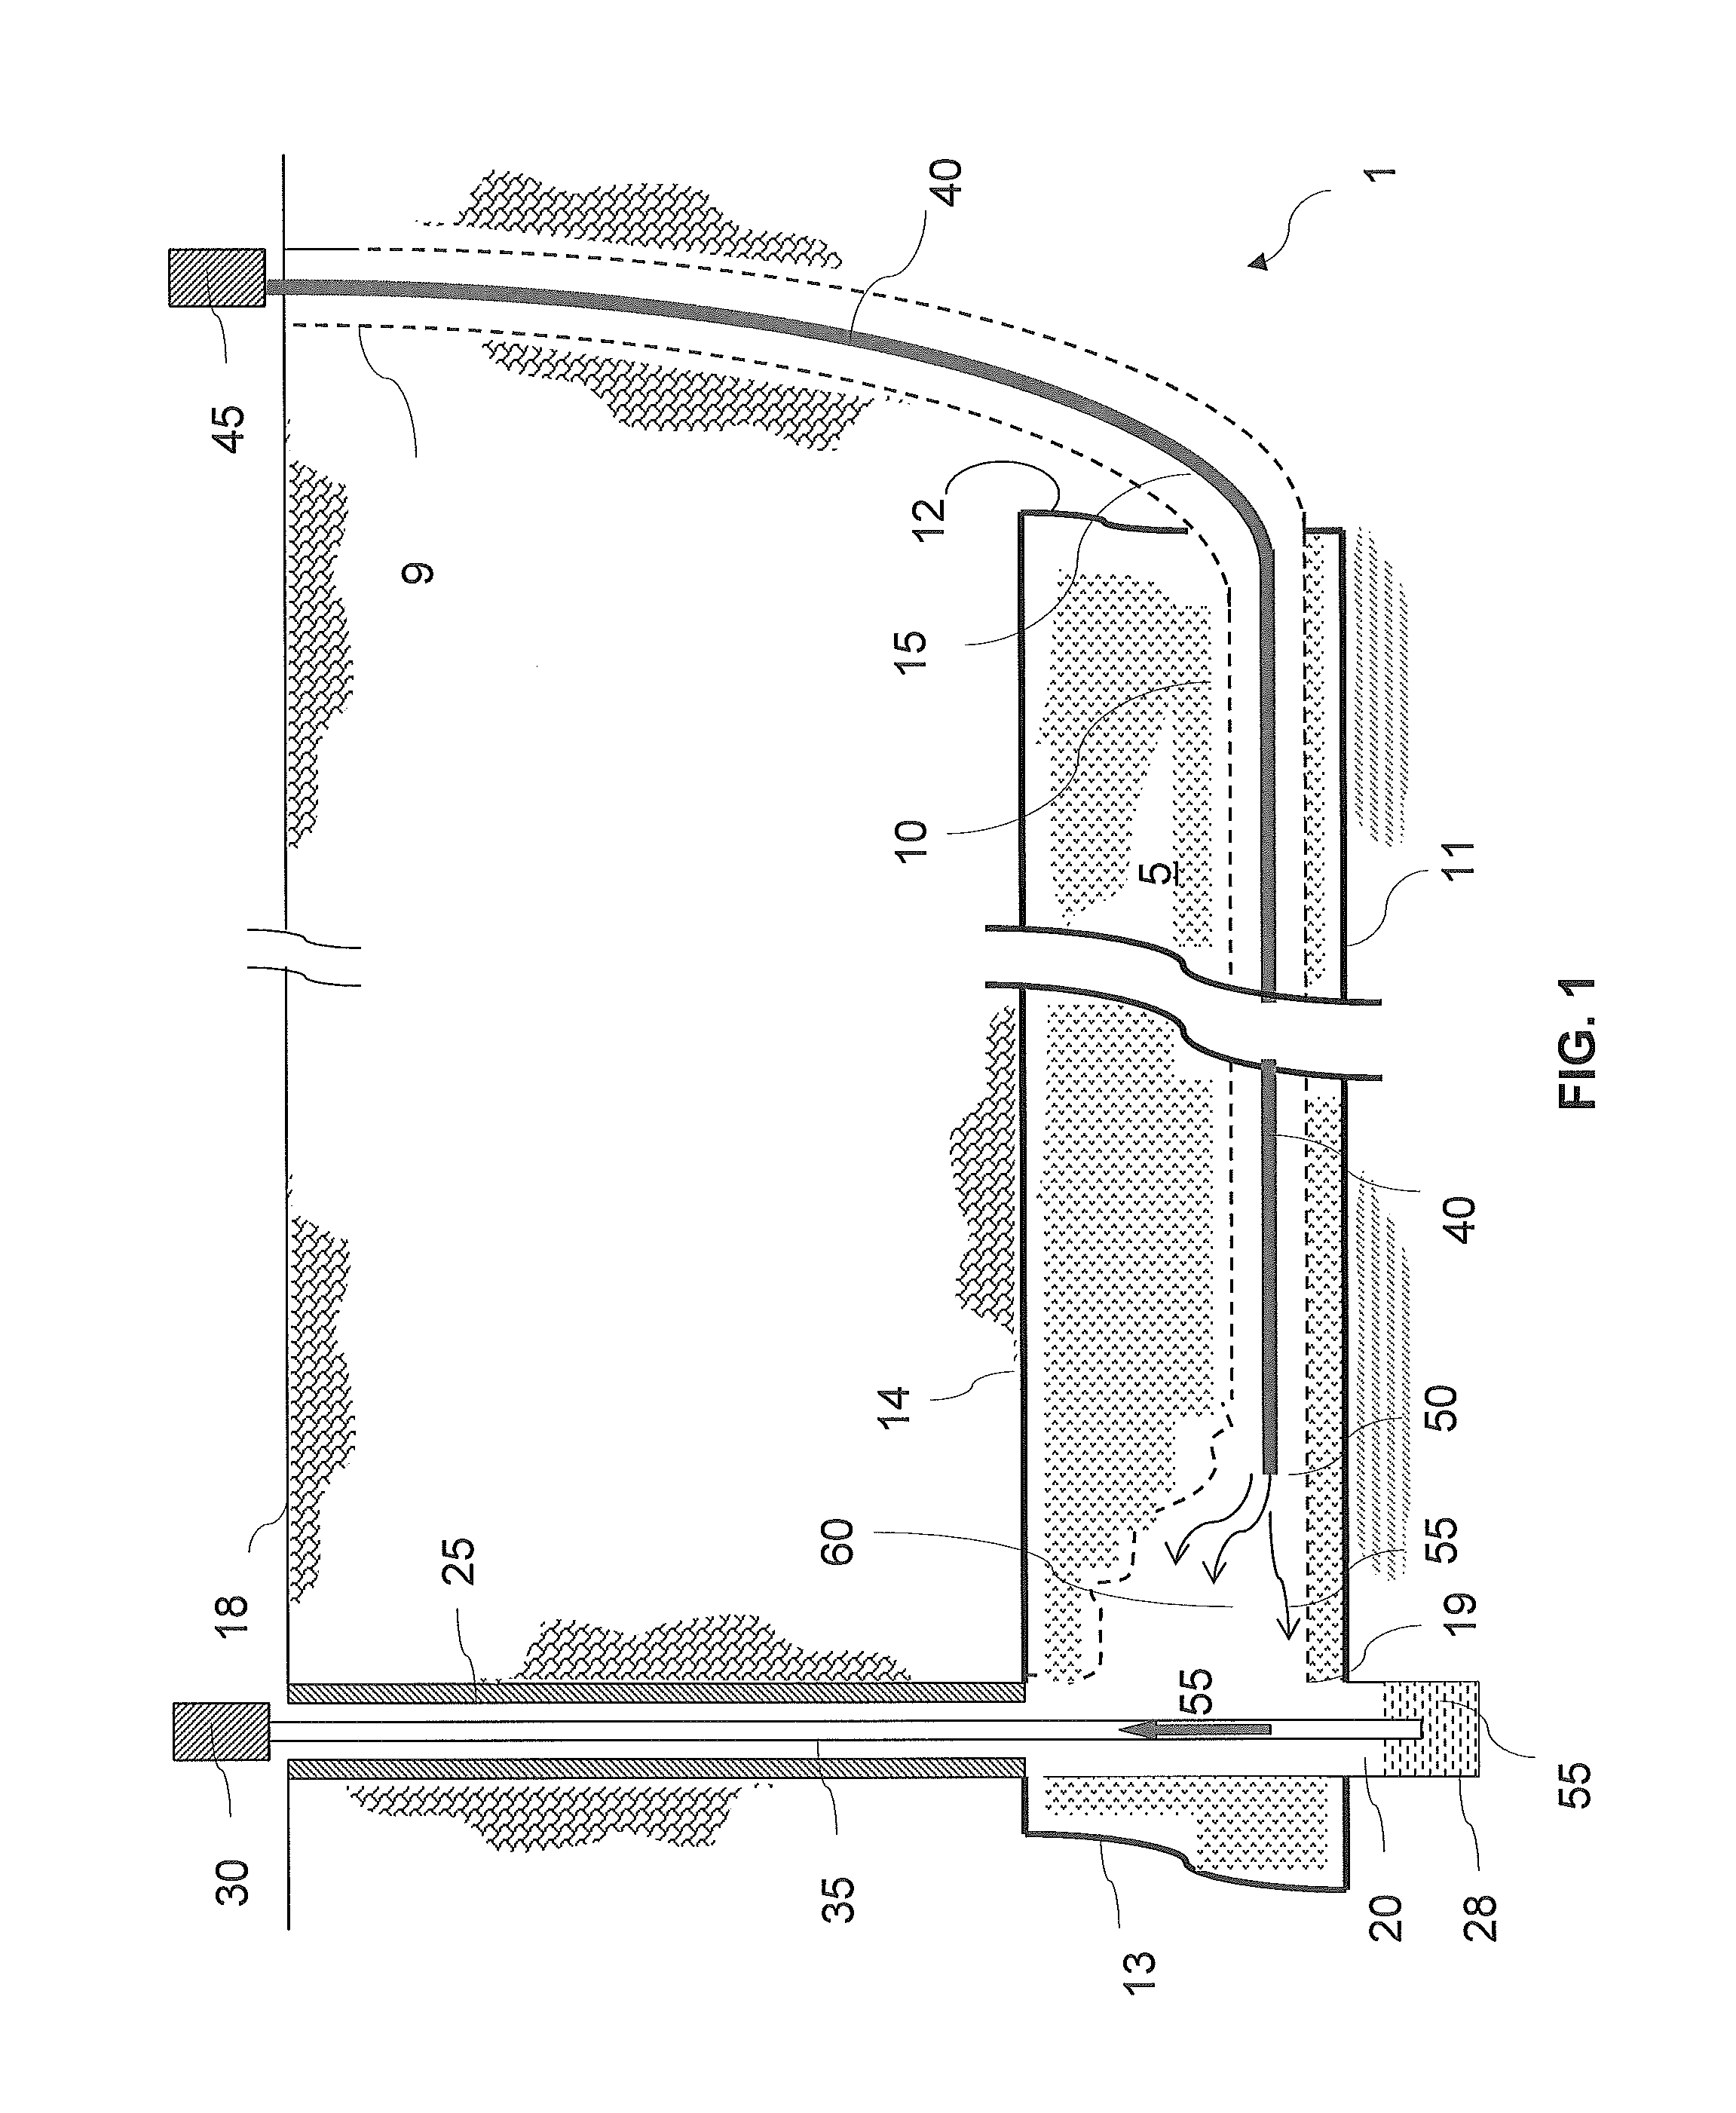 Traveling undercut solution mining systems and methods